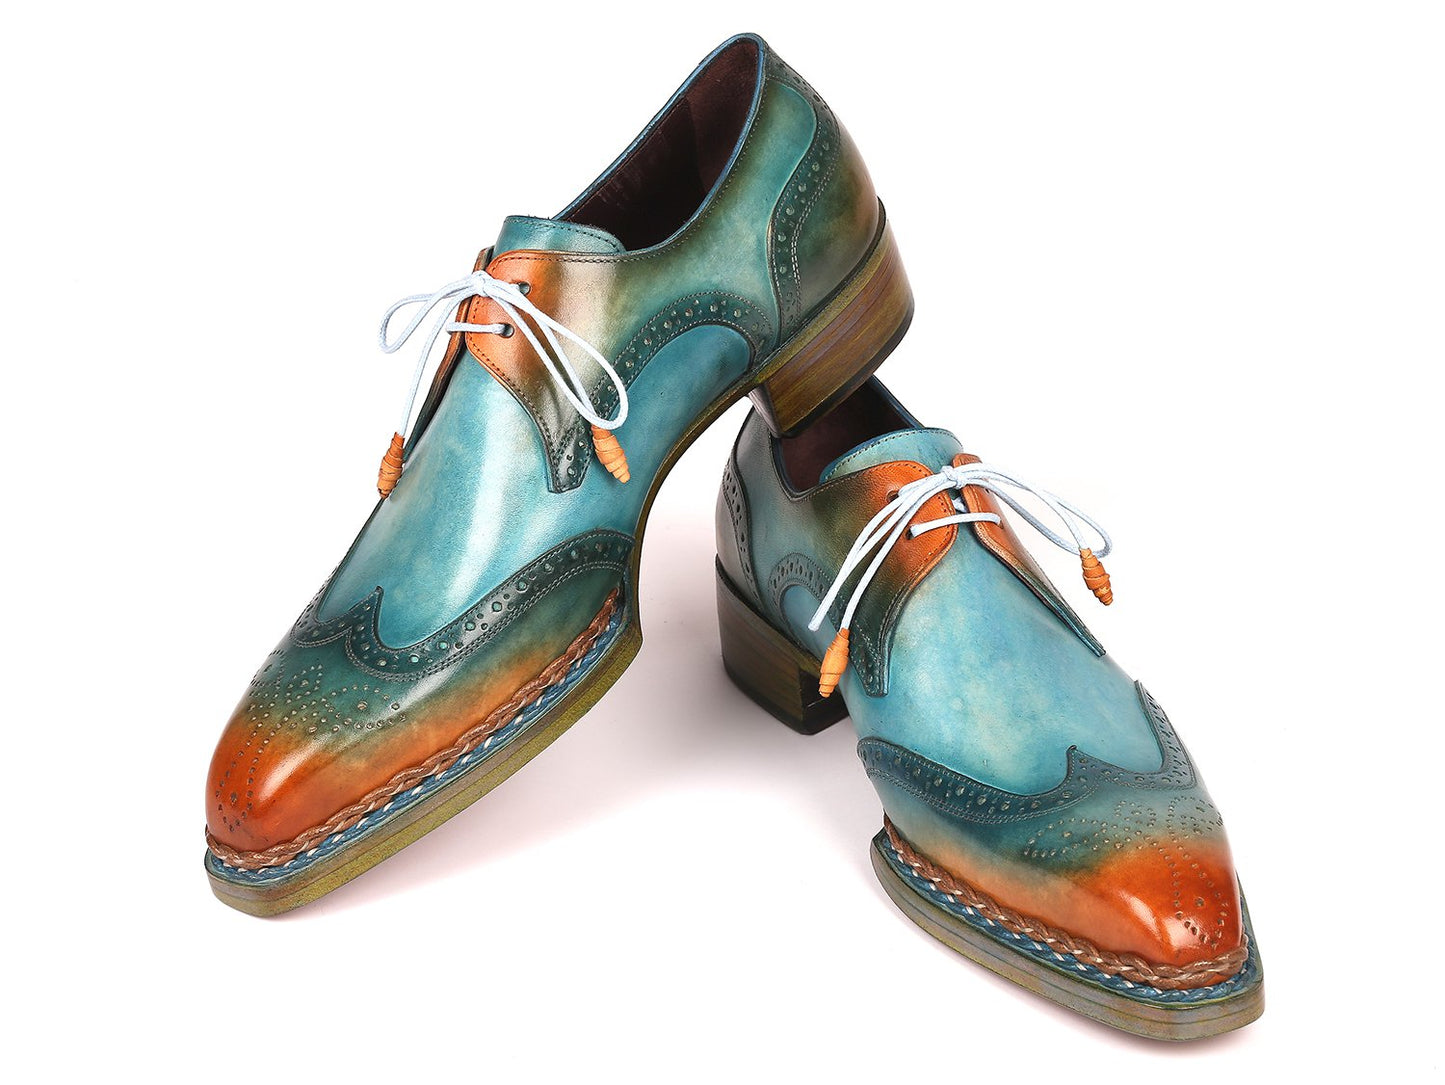 Paul Parkman Norwegian Welted Wingtip Derby Shoes Turquoise & Tobacco (ID#8506-TRQ)